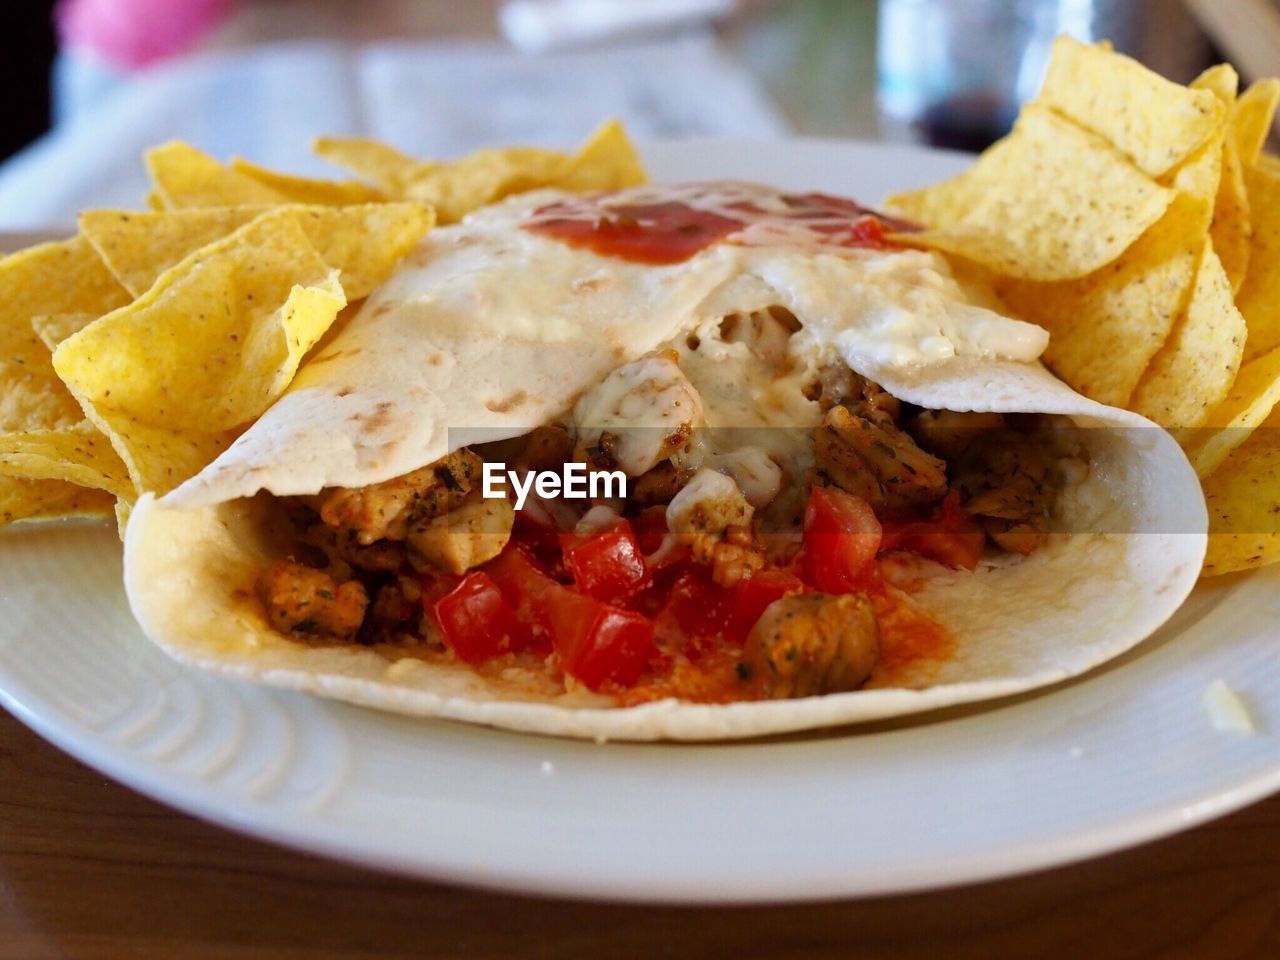 Close-up of burrito served in plate on table